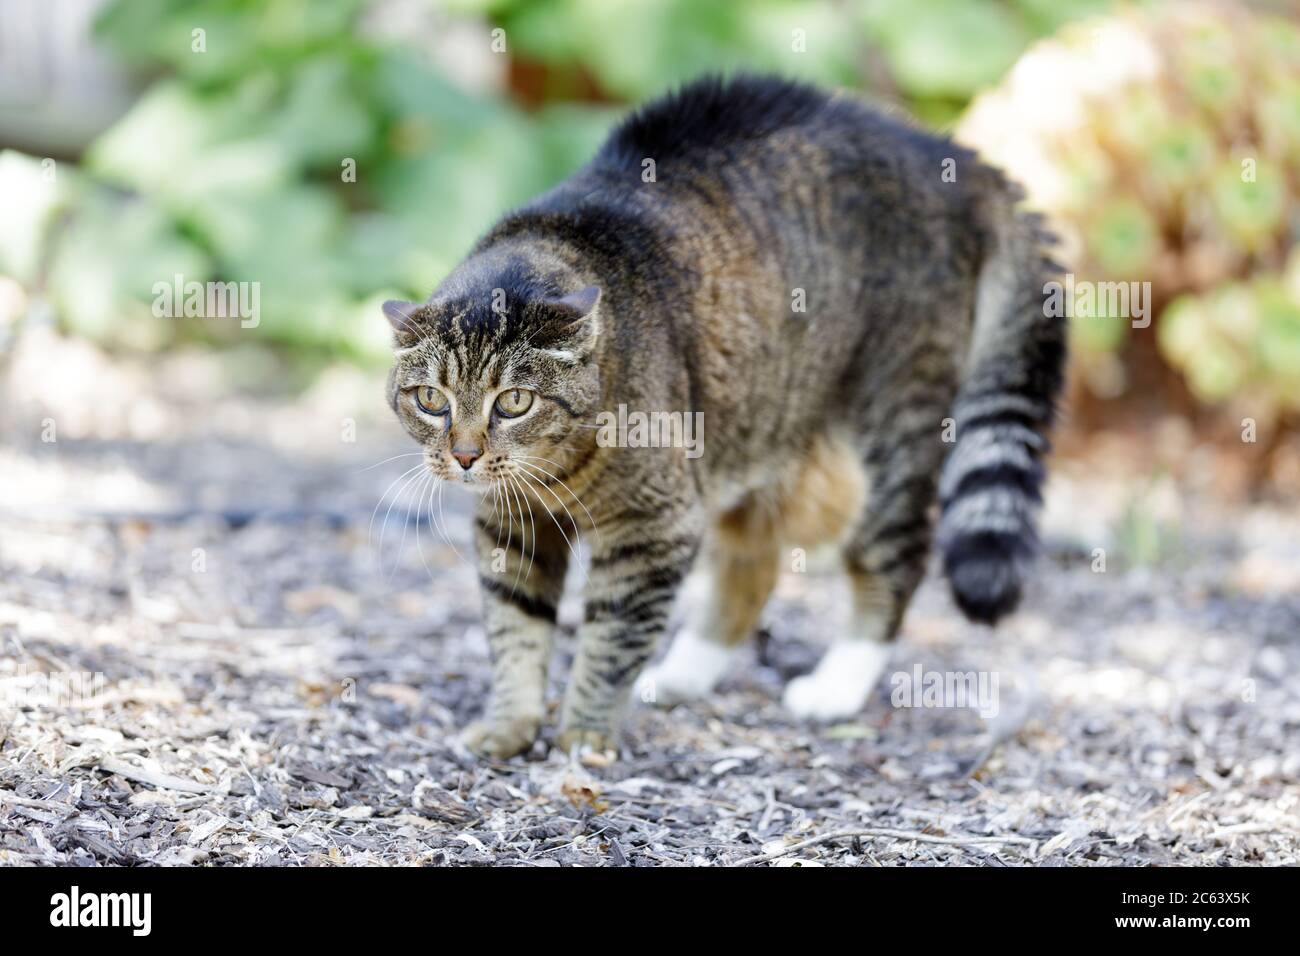 Threatened European Shorthair Cat Arching Back with Hair Standing Up Stock Photo